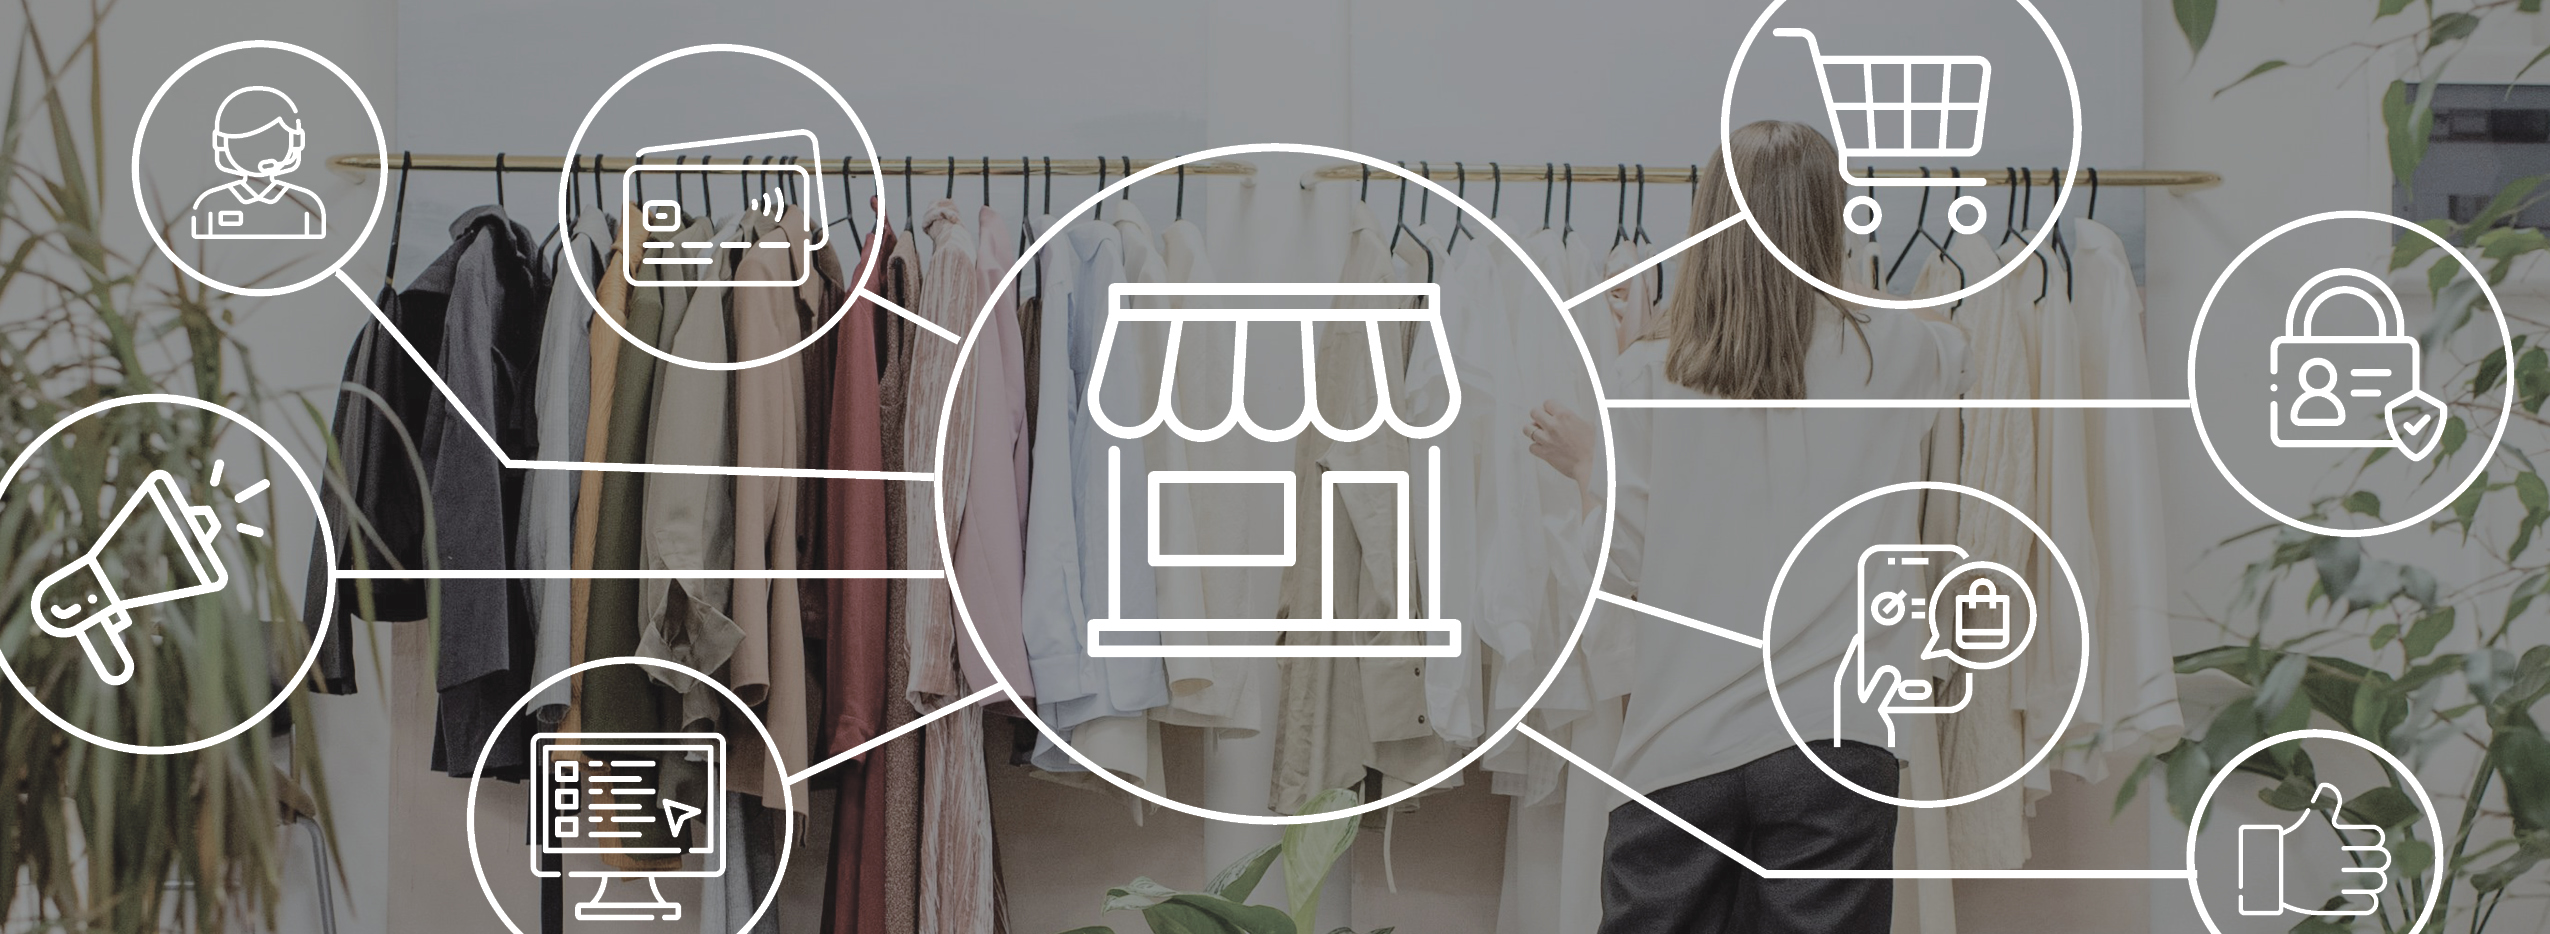 Omnicommerce: How to Bring Omnichannel Strategy to Your Small Business